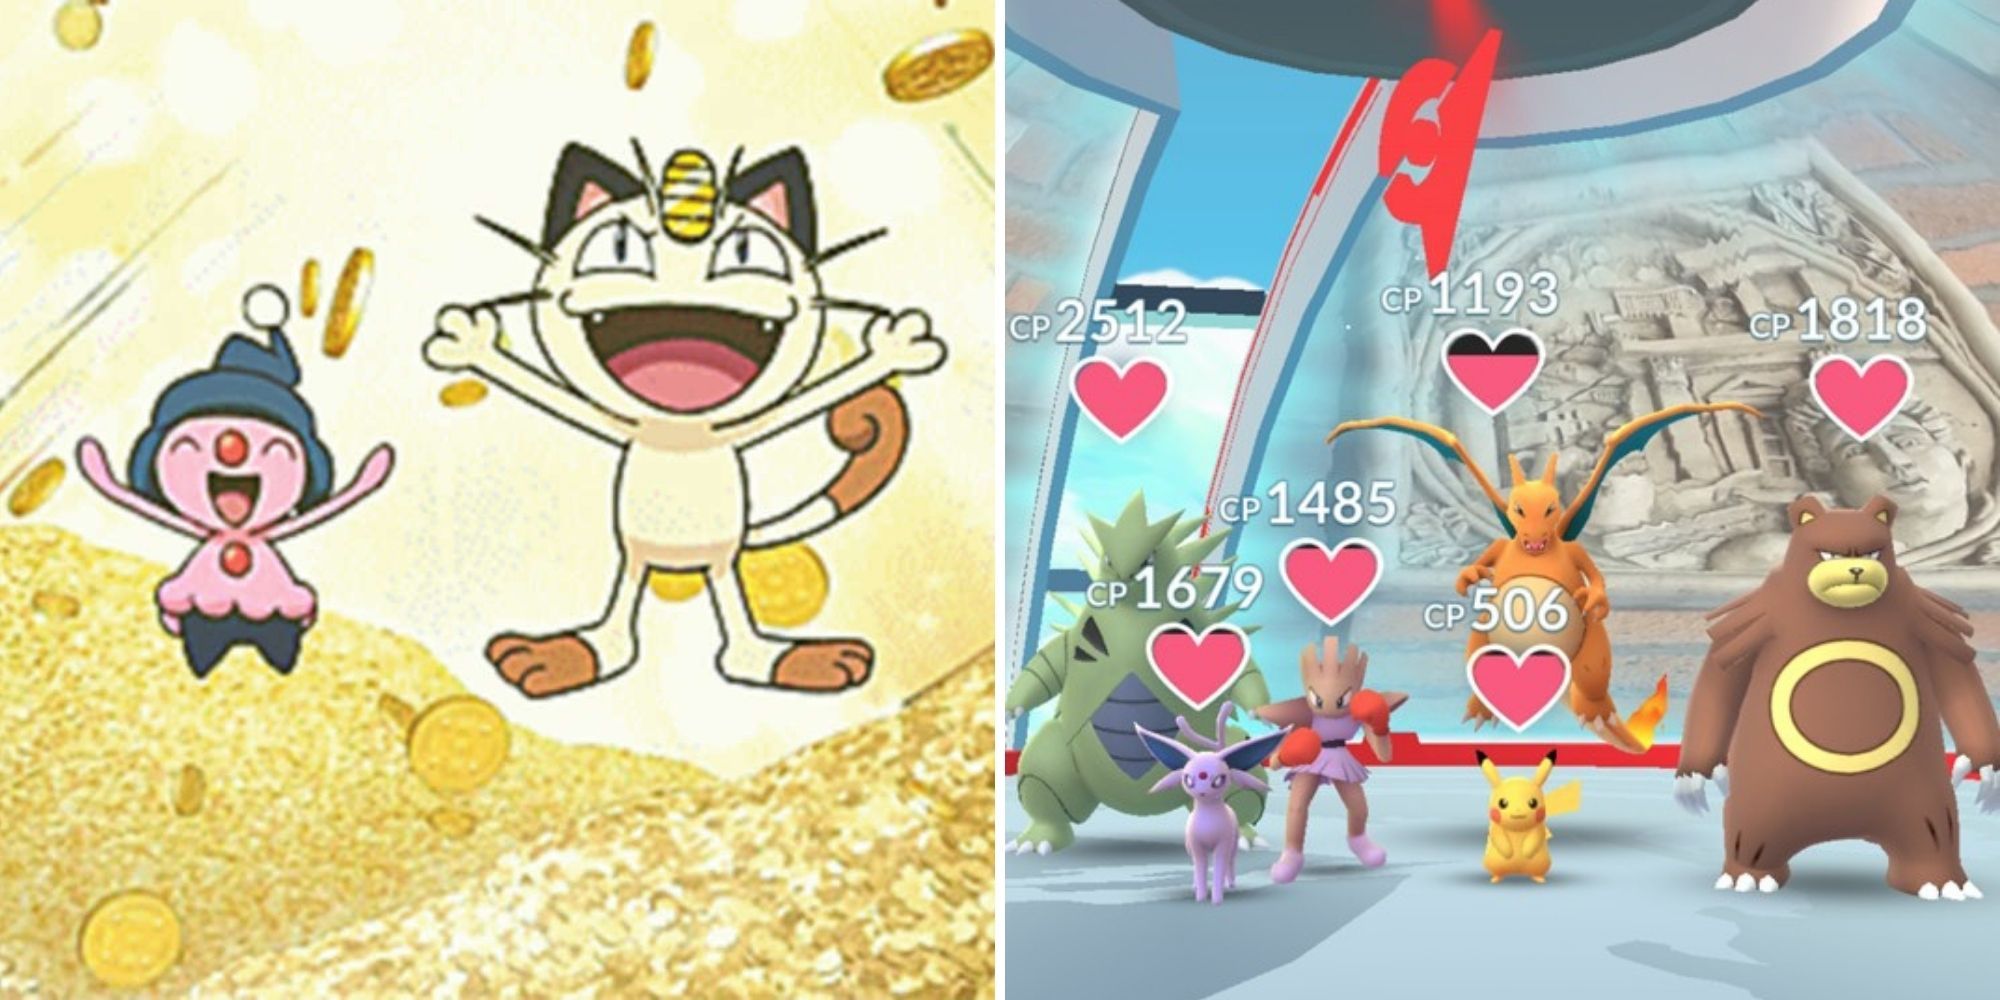 Pokemon GO - Meowth in Pokecoin pile (left), Gym with Pokemon in it (right)